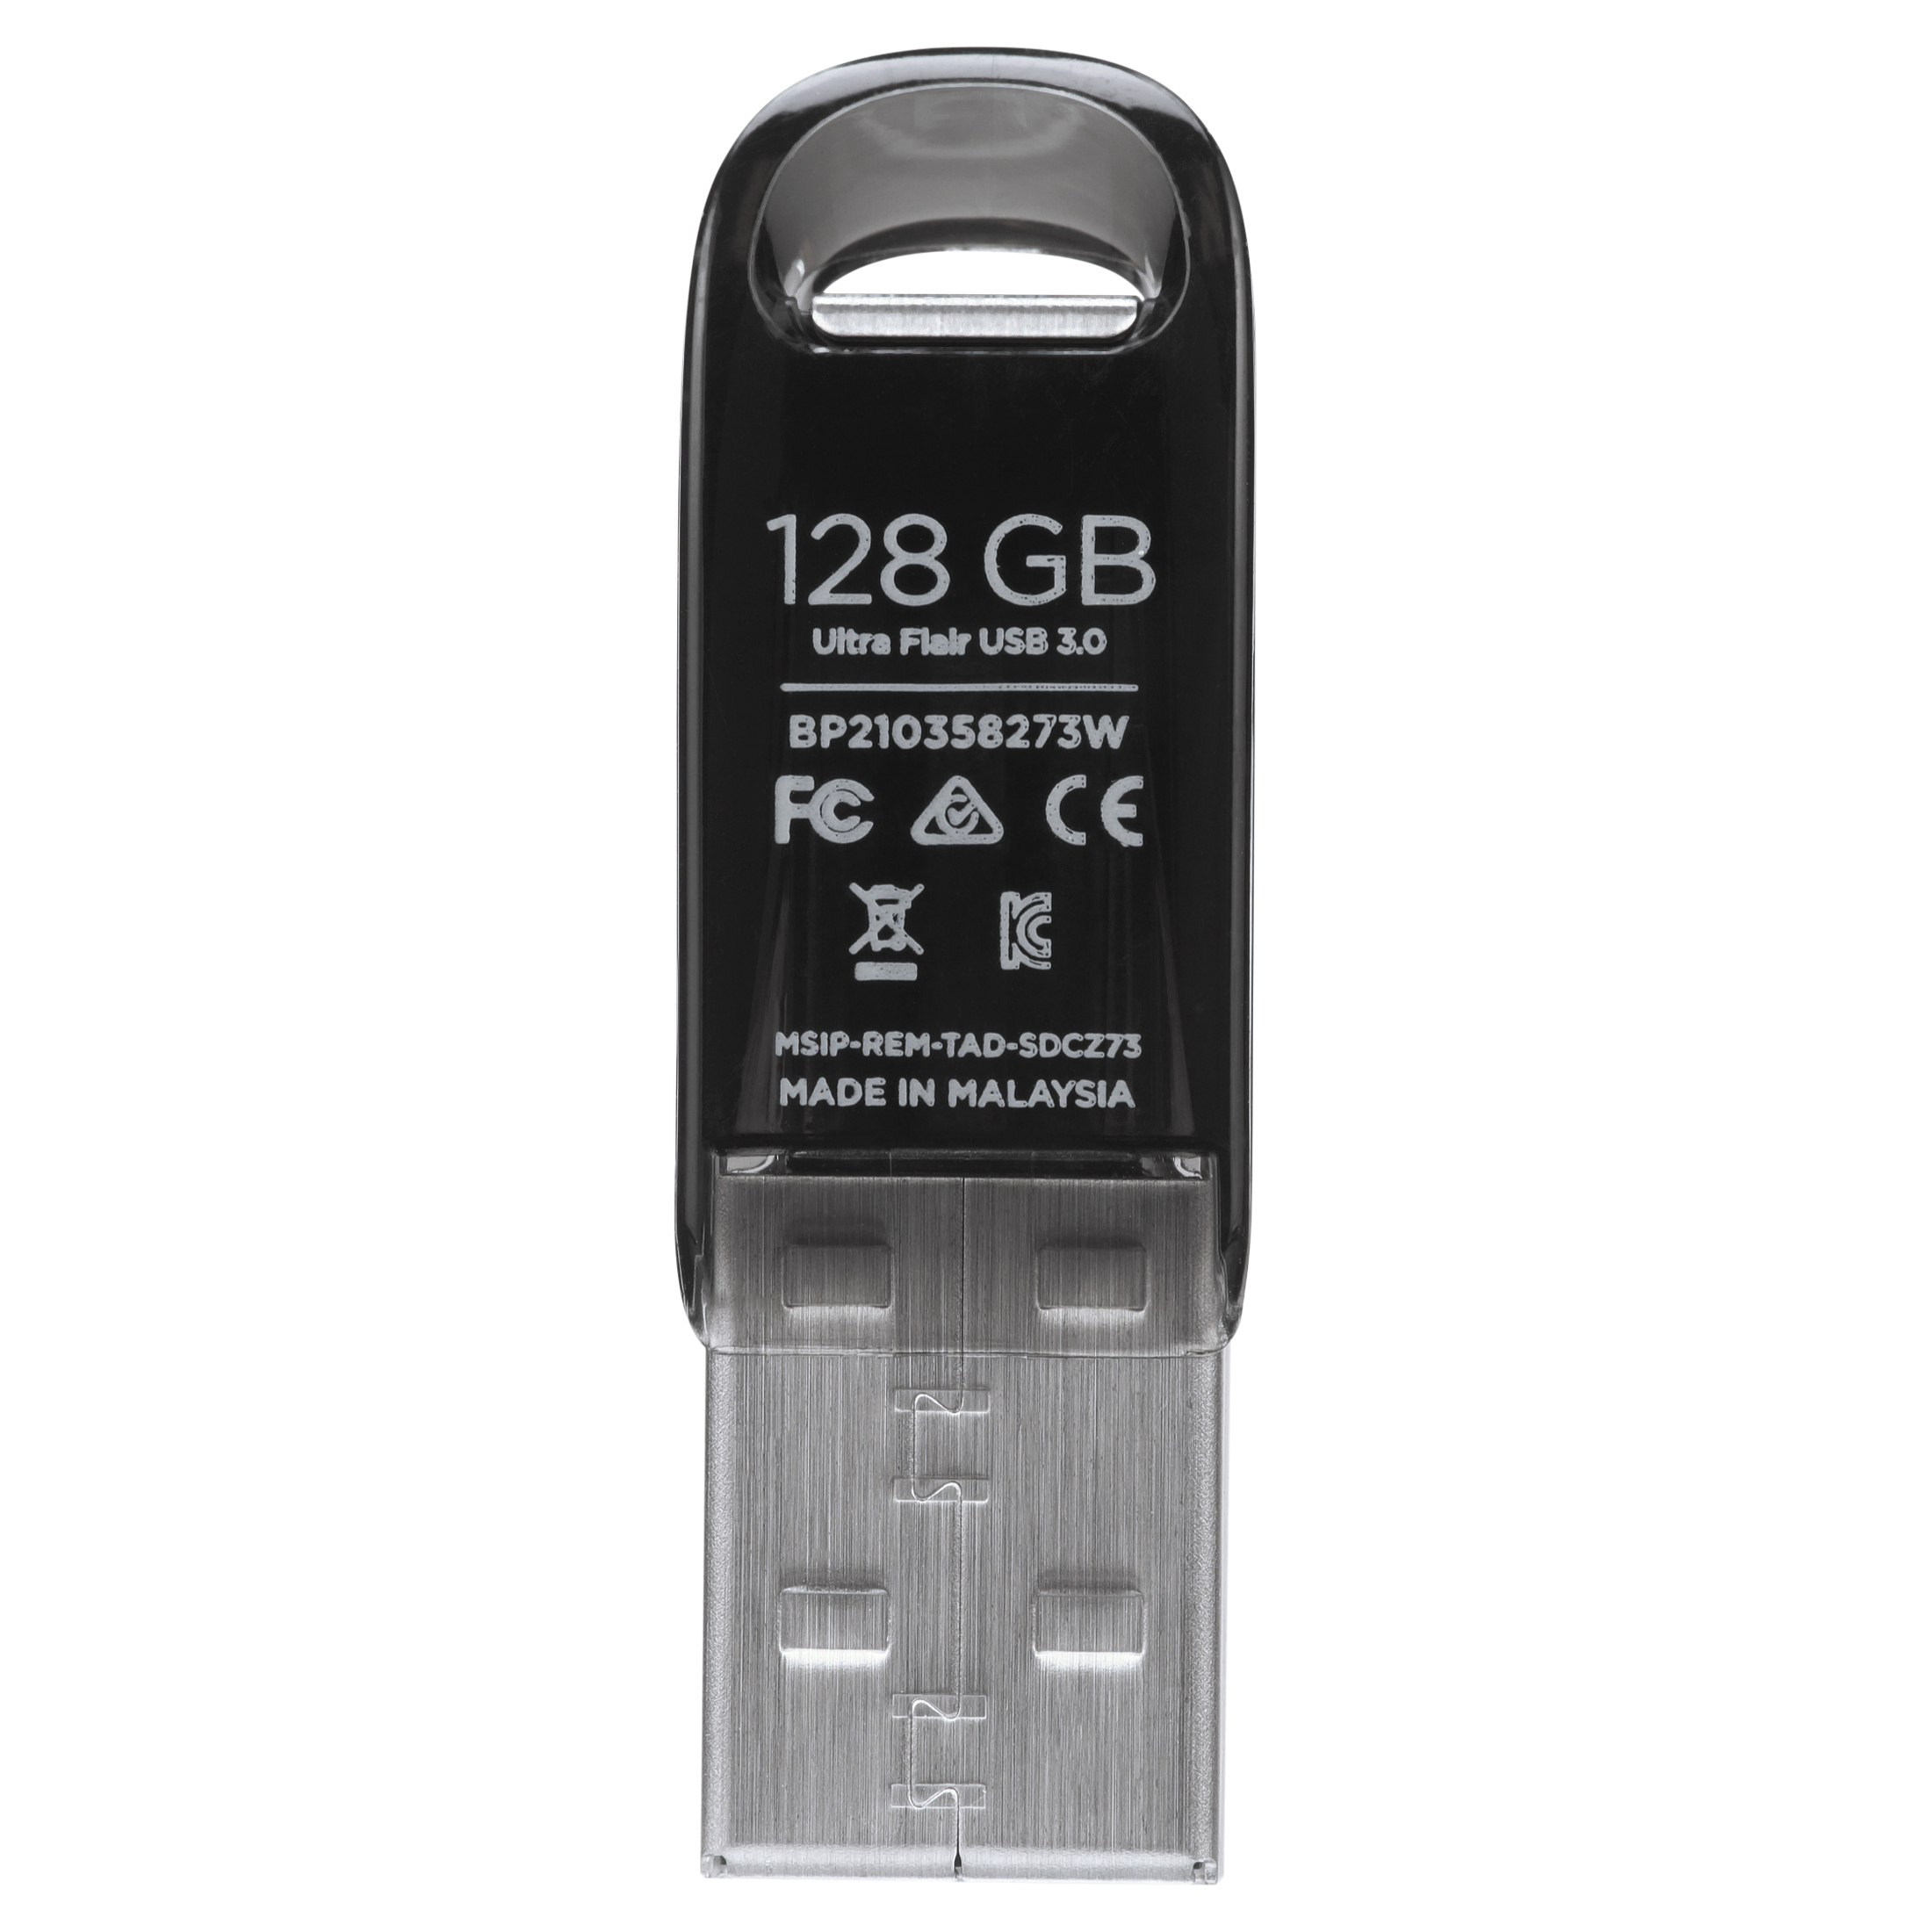 SanDisk 128GB Ultra Flair USB 3.0 Flash Drive - SDCZ73-128G-AW46 - image 5 of 10